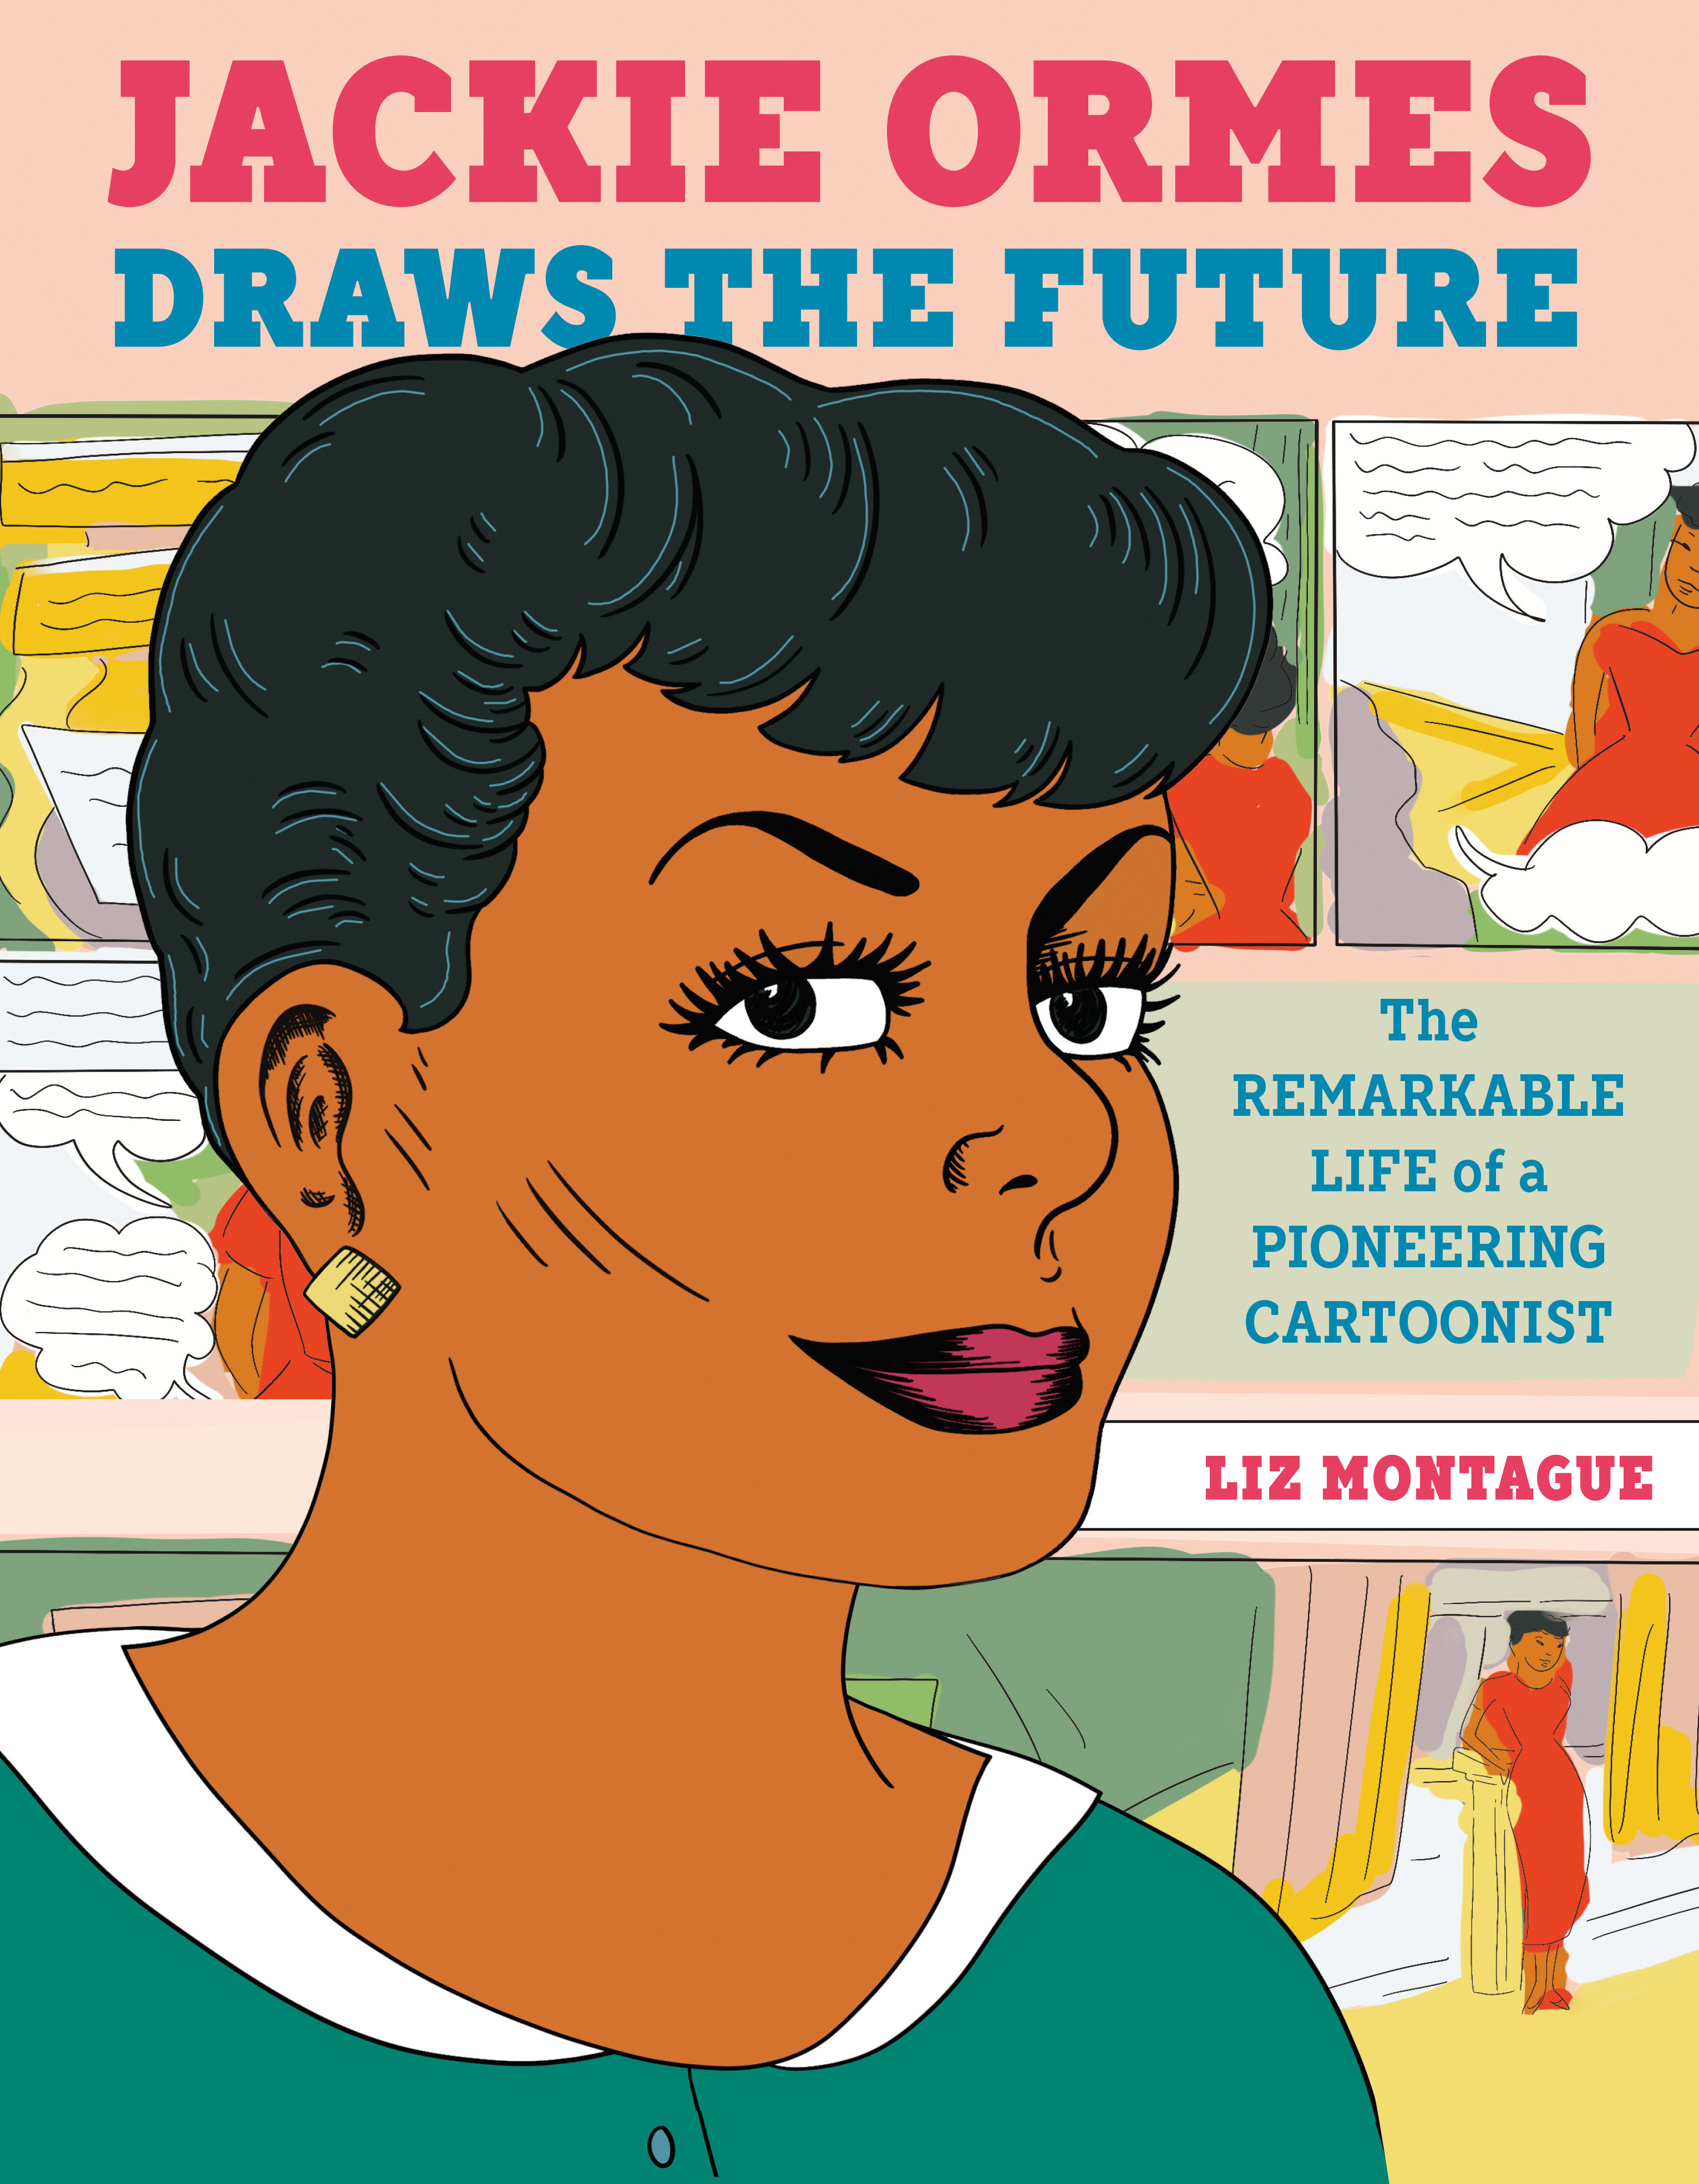 Jackie Ormes Draws The Future (Hardcover Book)